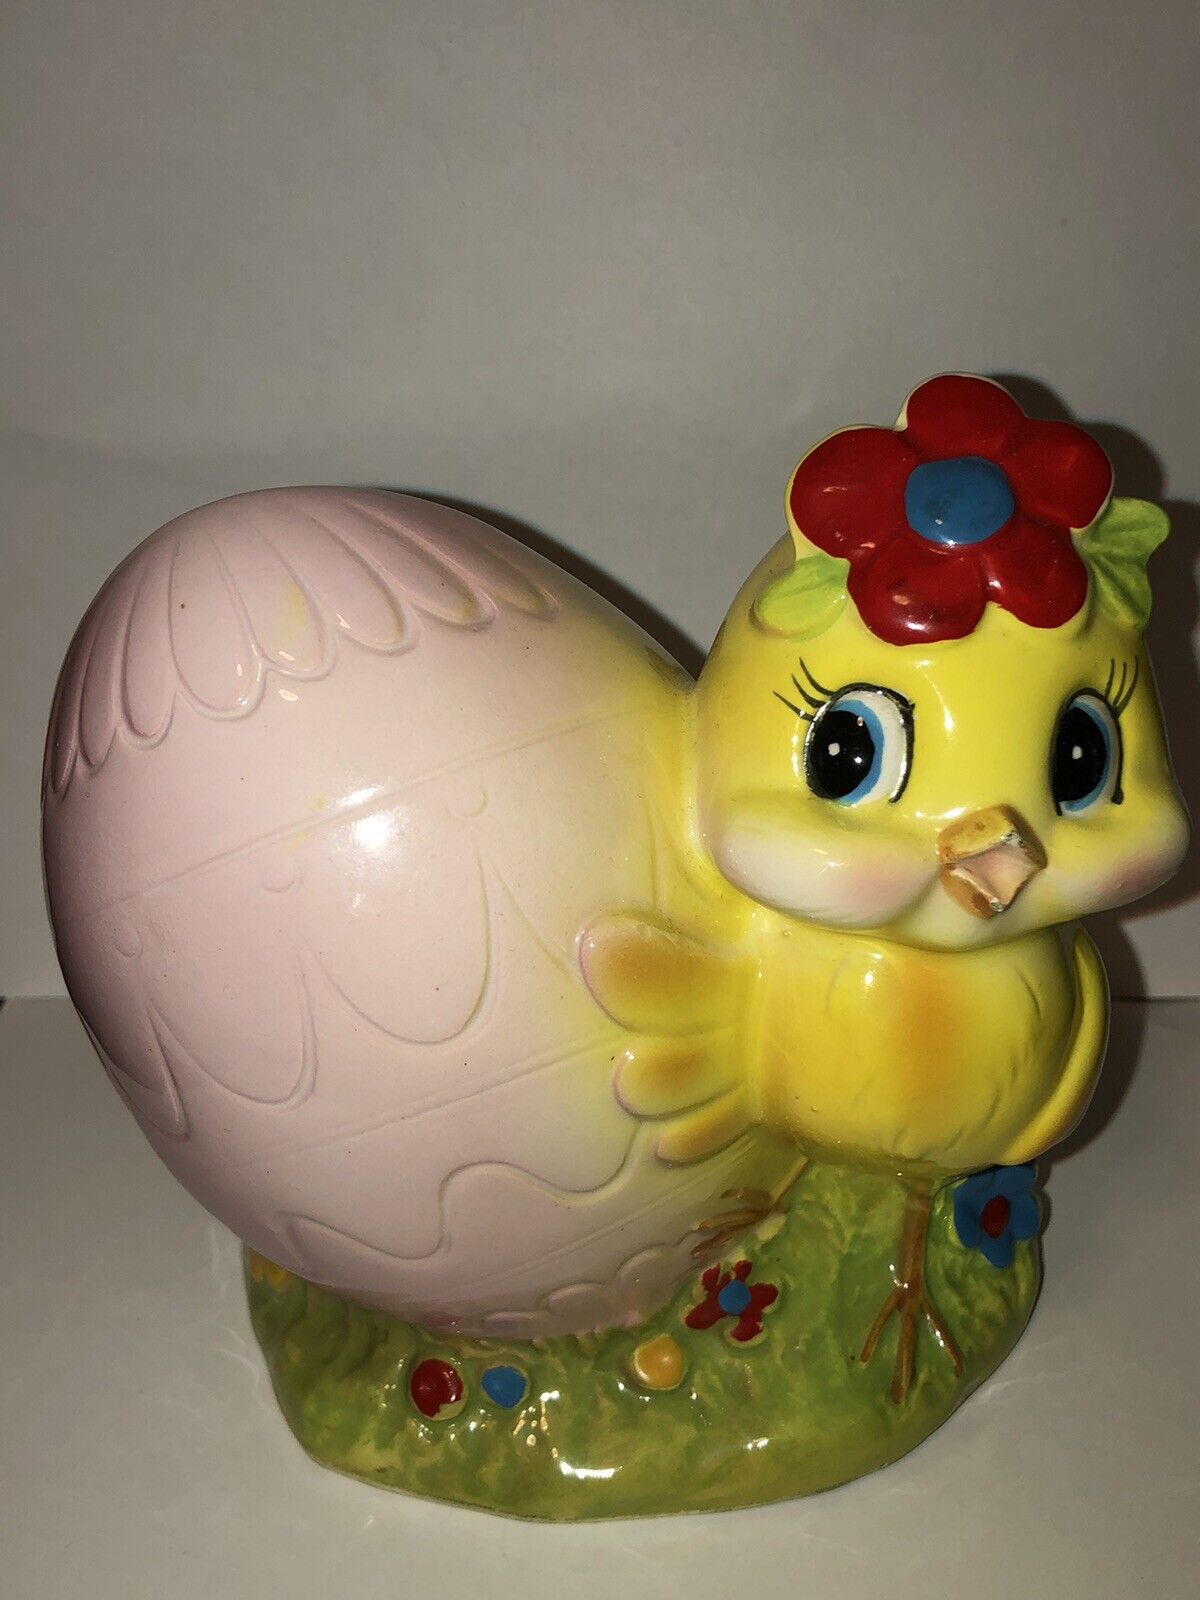 Rare Vintage PY Inspired Anthropomorphic Japan Hard To Find Chick Planter